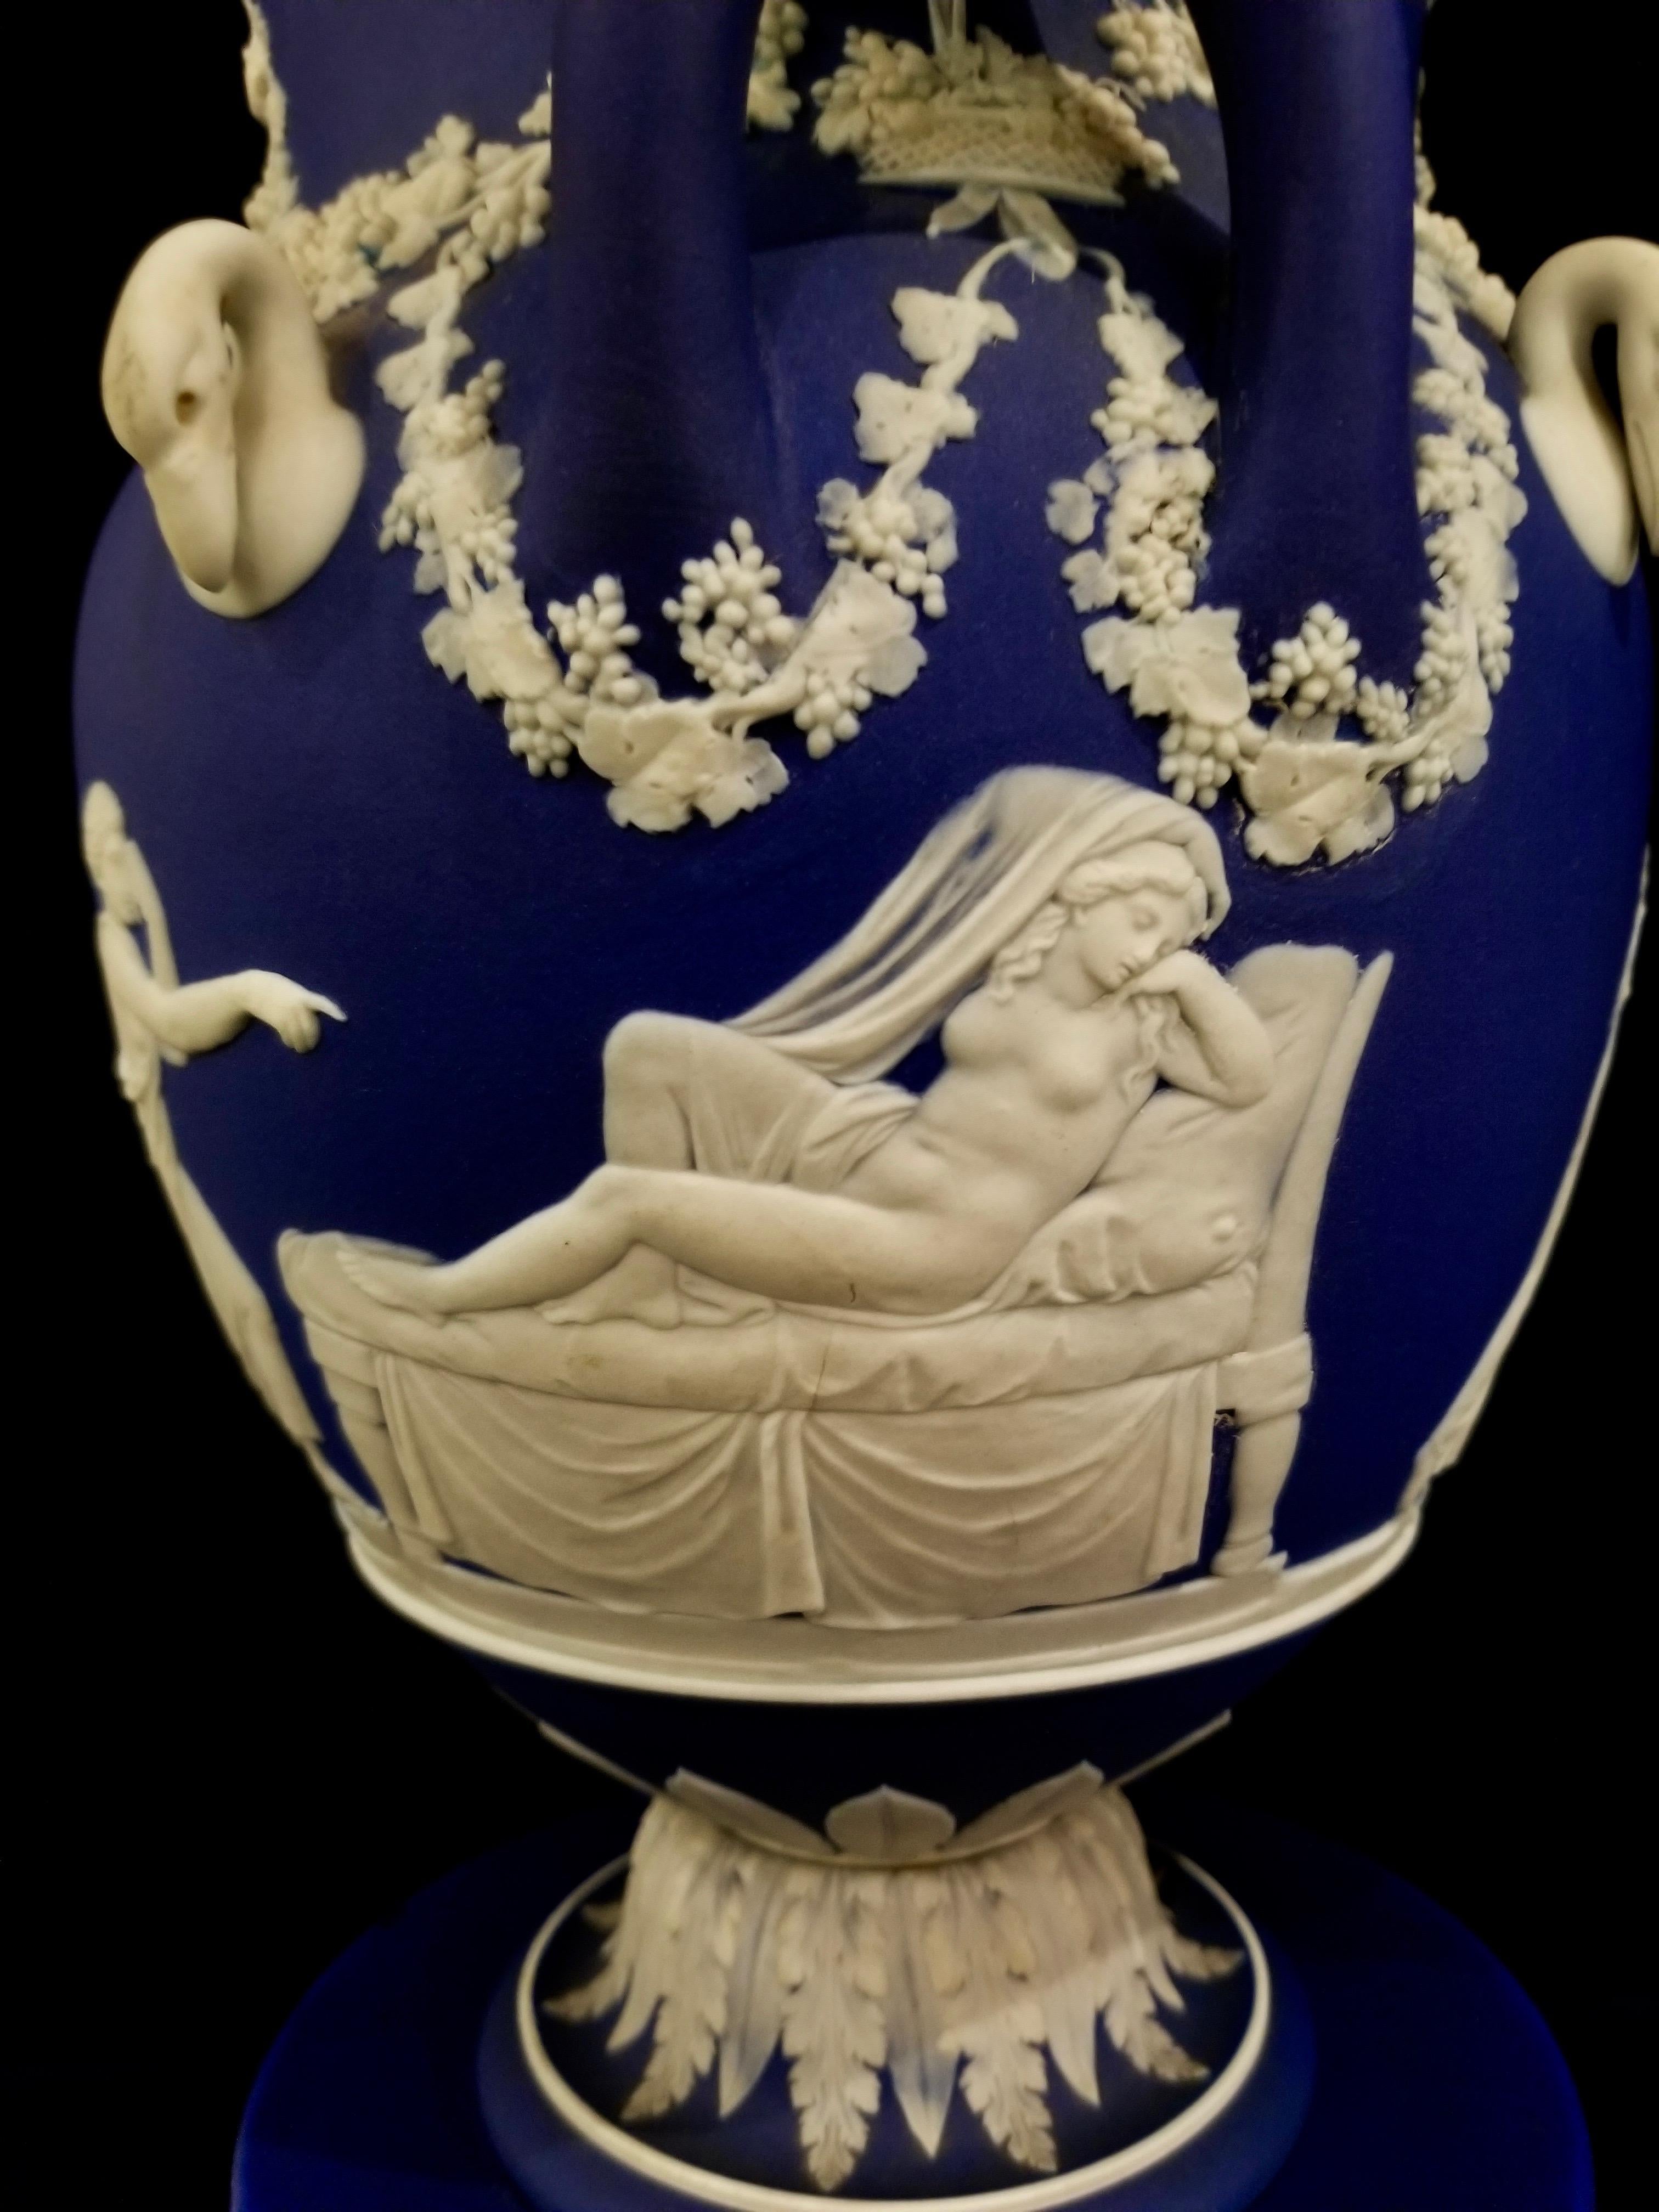 English Jasperware Blue Wedgwood Vases w/ Neoclassical Subjects on Plinths, Pair In Good Condition For Sale In New York, NY